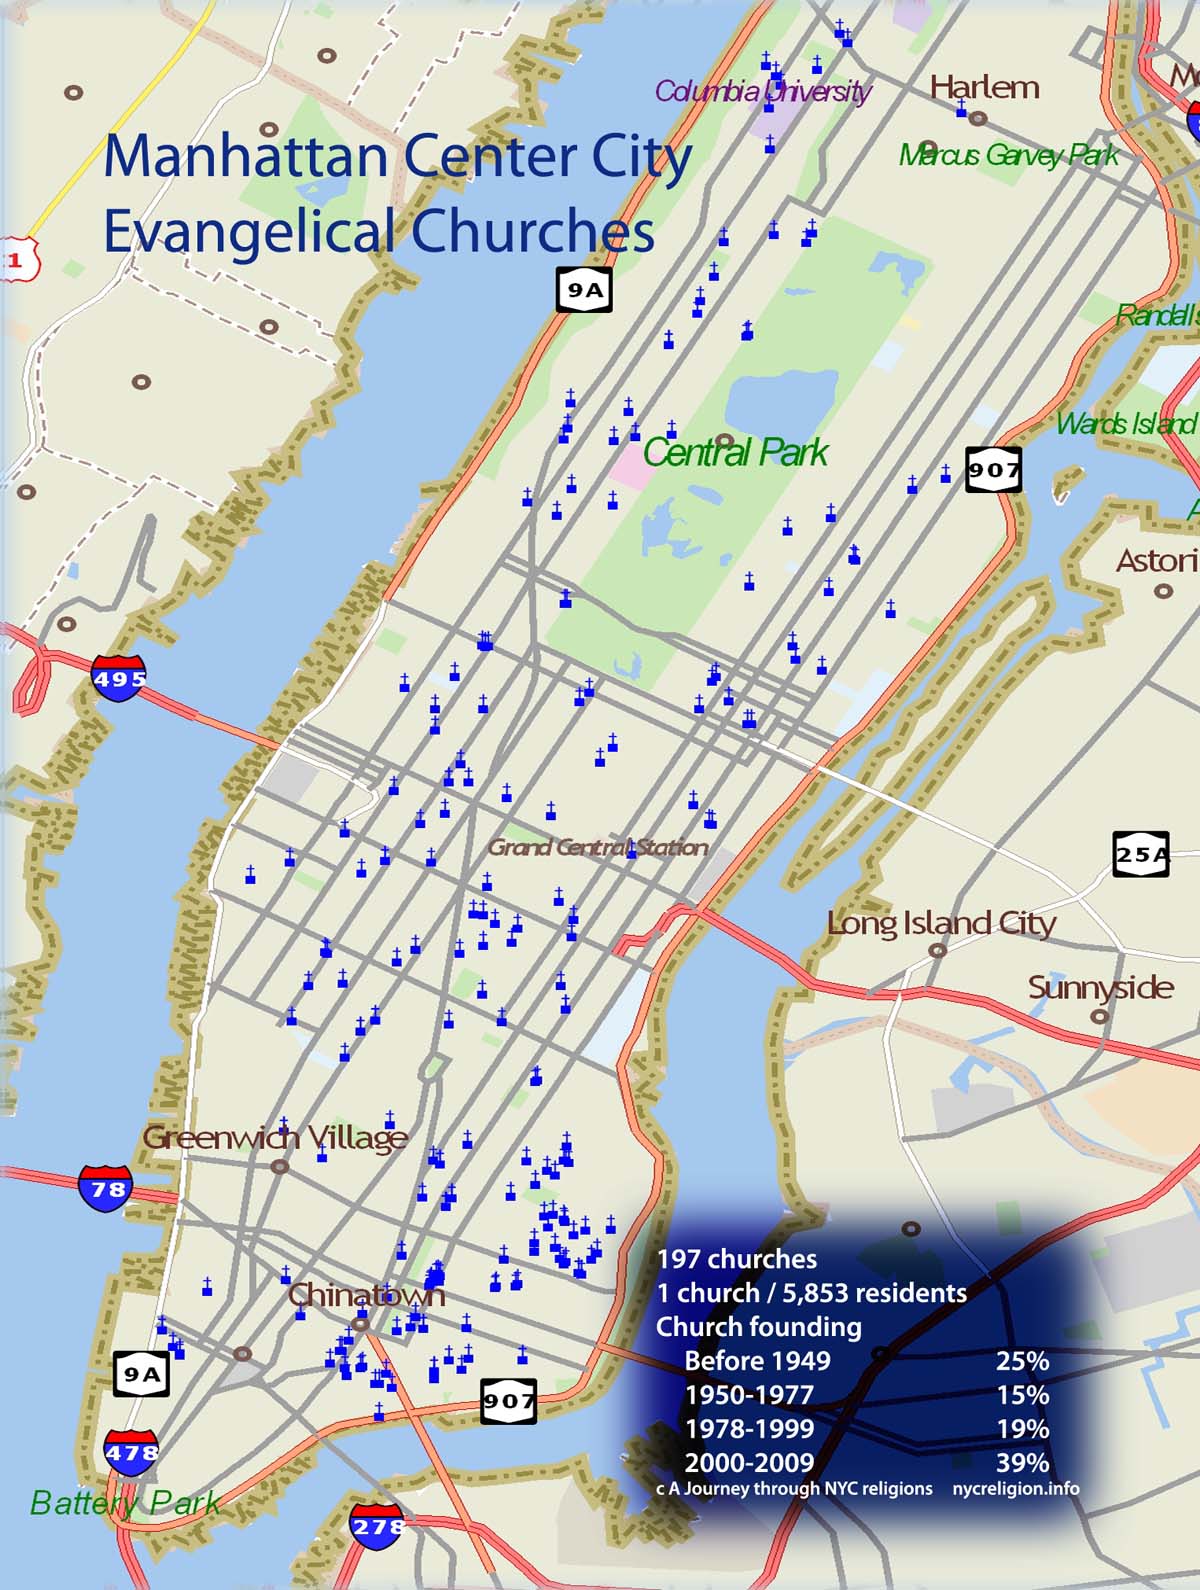 Twelve part series "The Rise of the Postsecular City" provided the first ever historical statistical overview of evangelical churches in central Manhattan